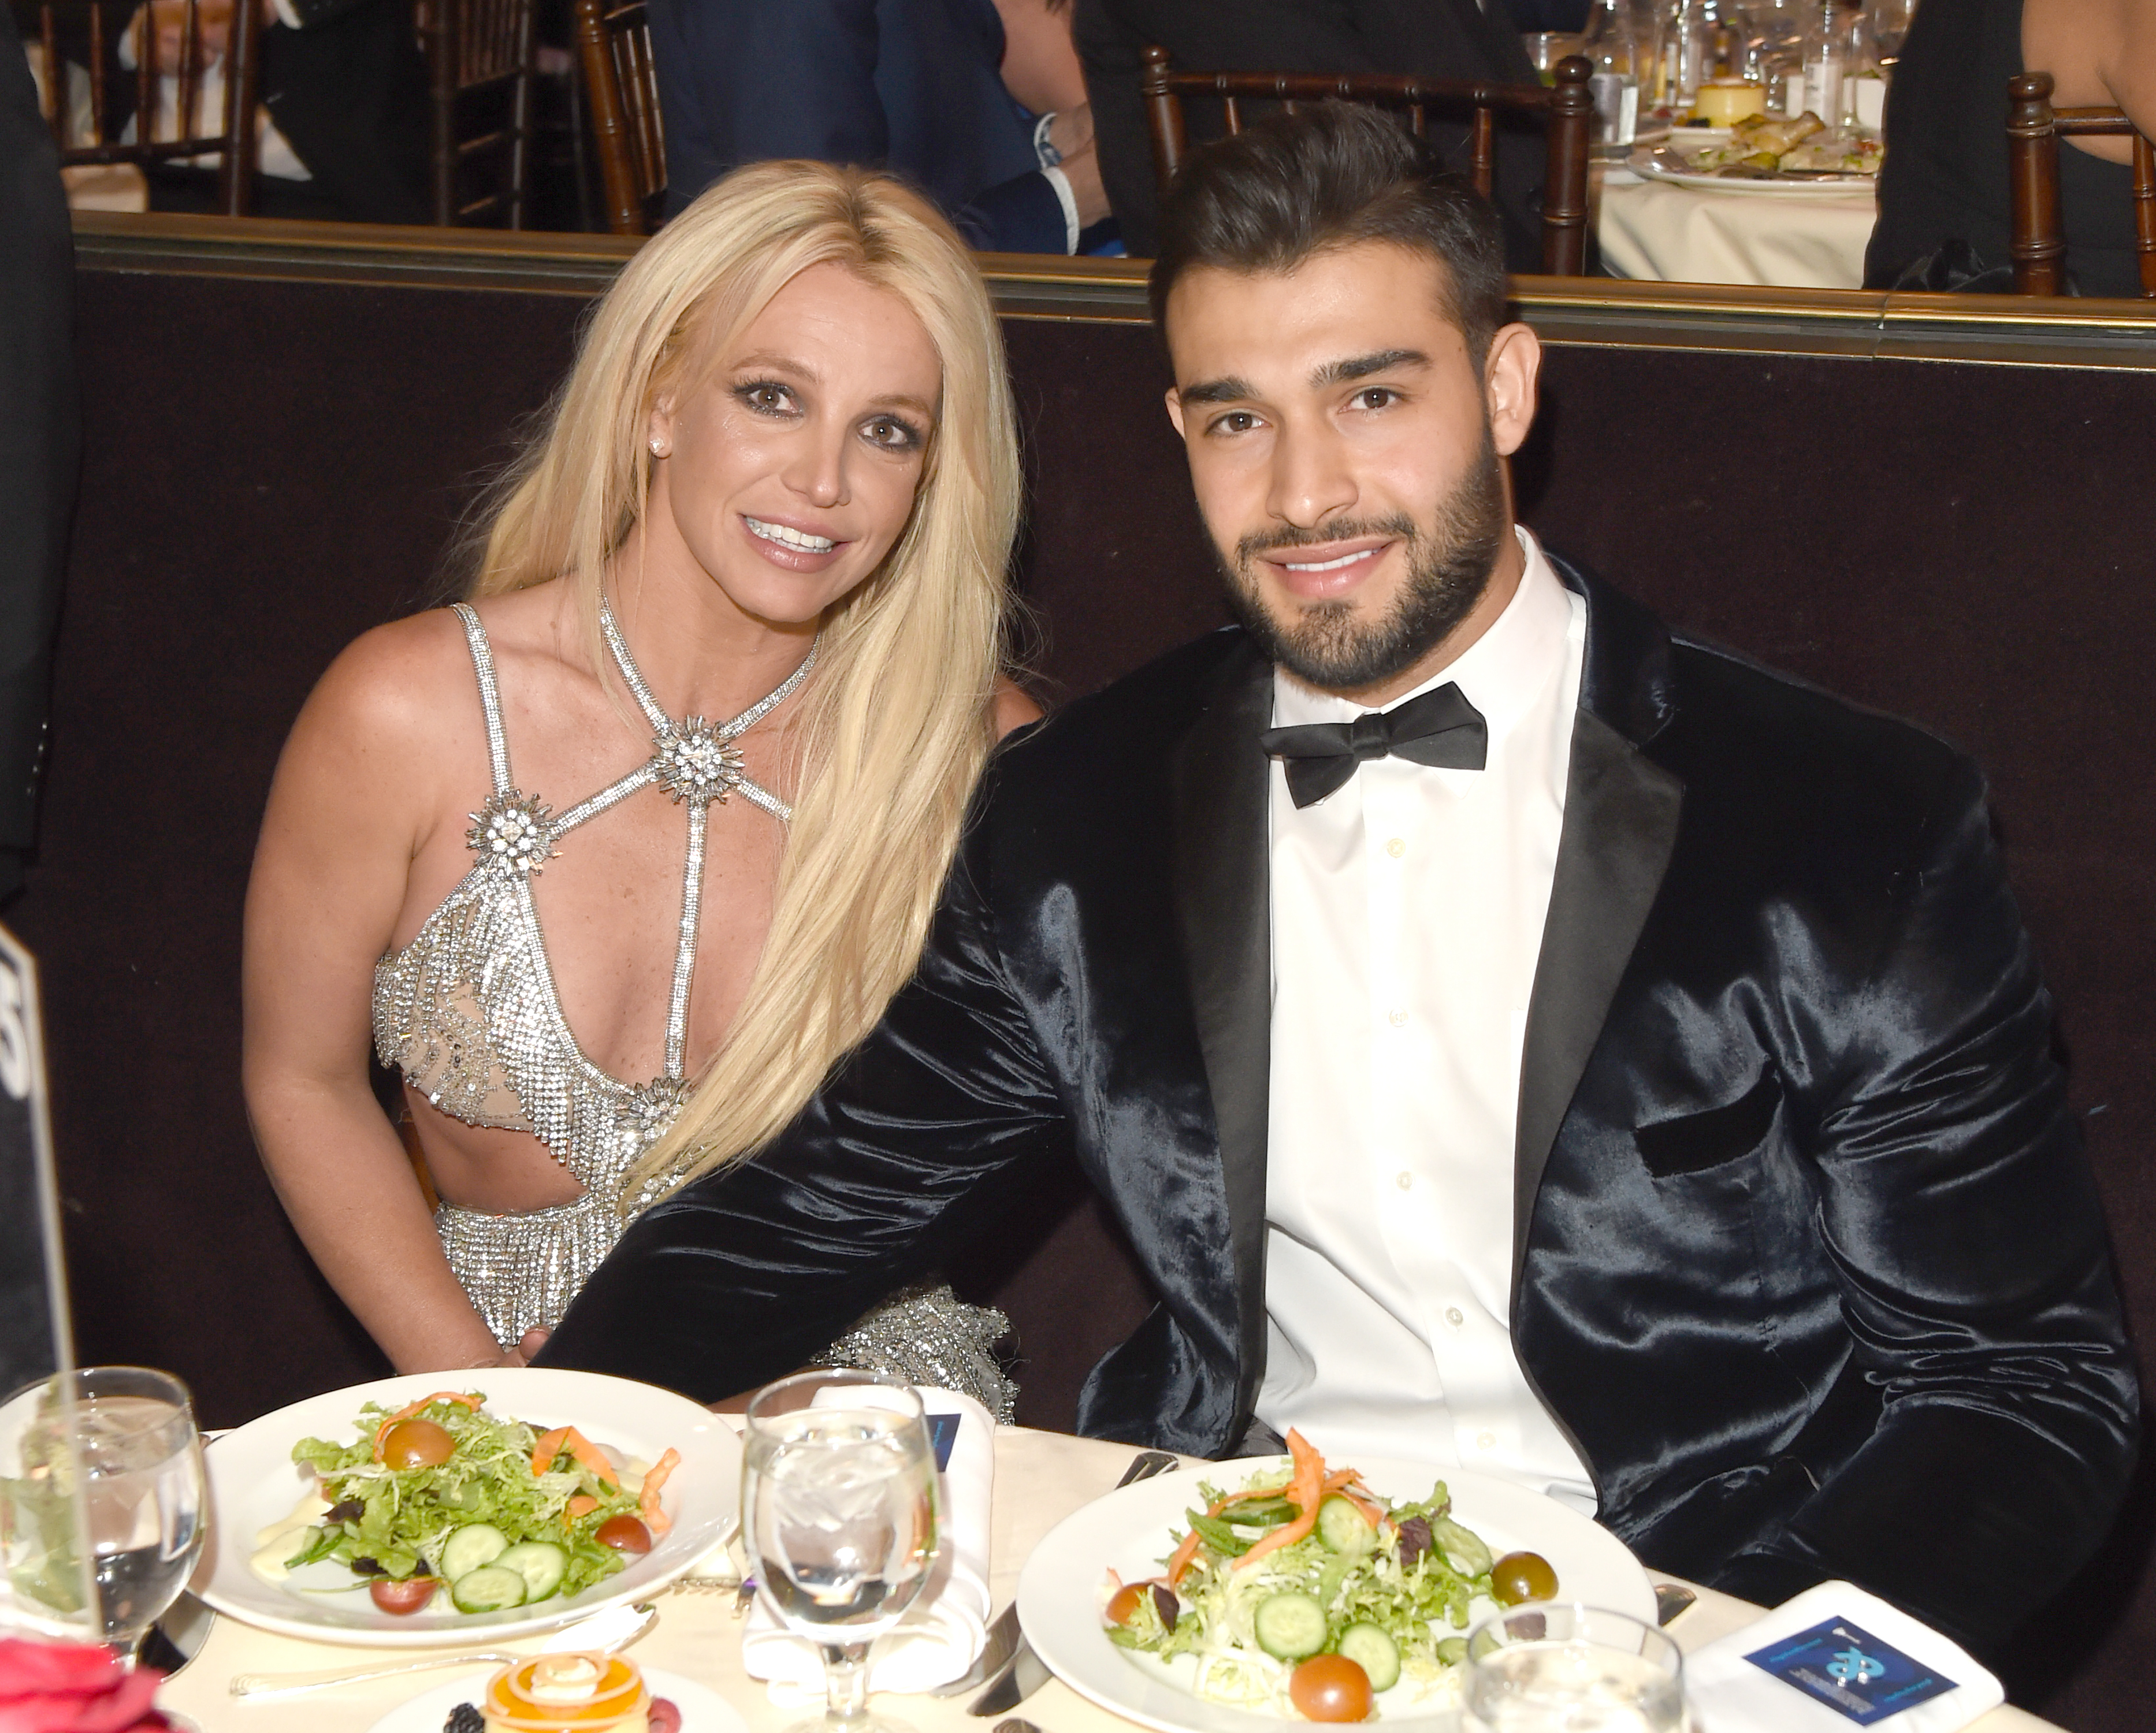 Close-up of Britney and Sam sitting together and smiling at a media event